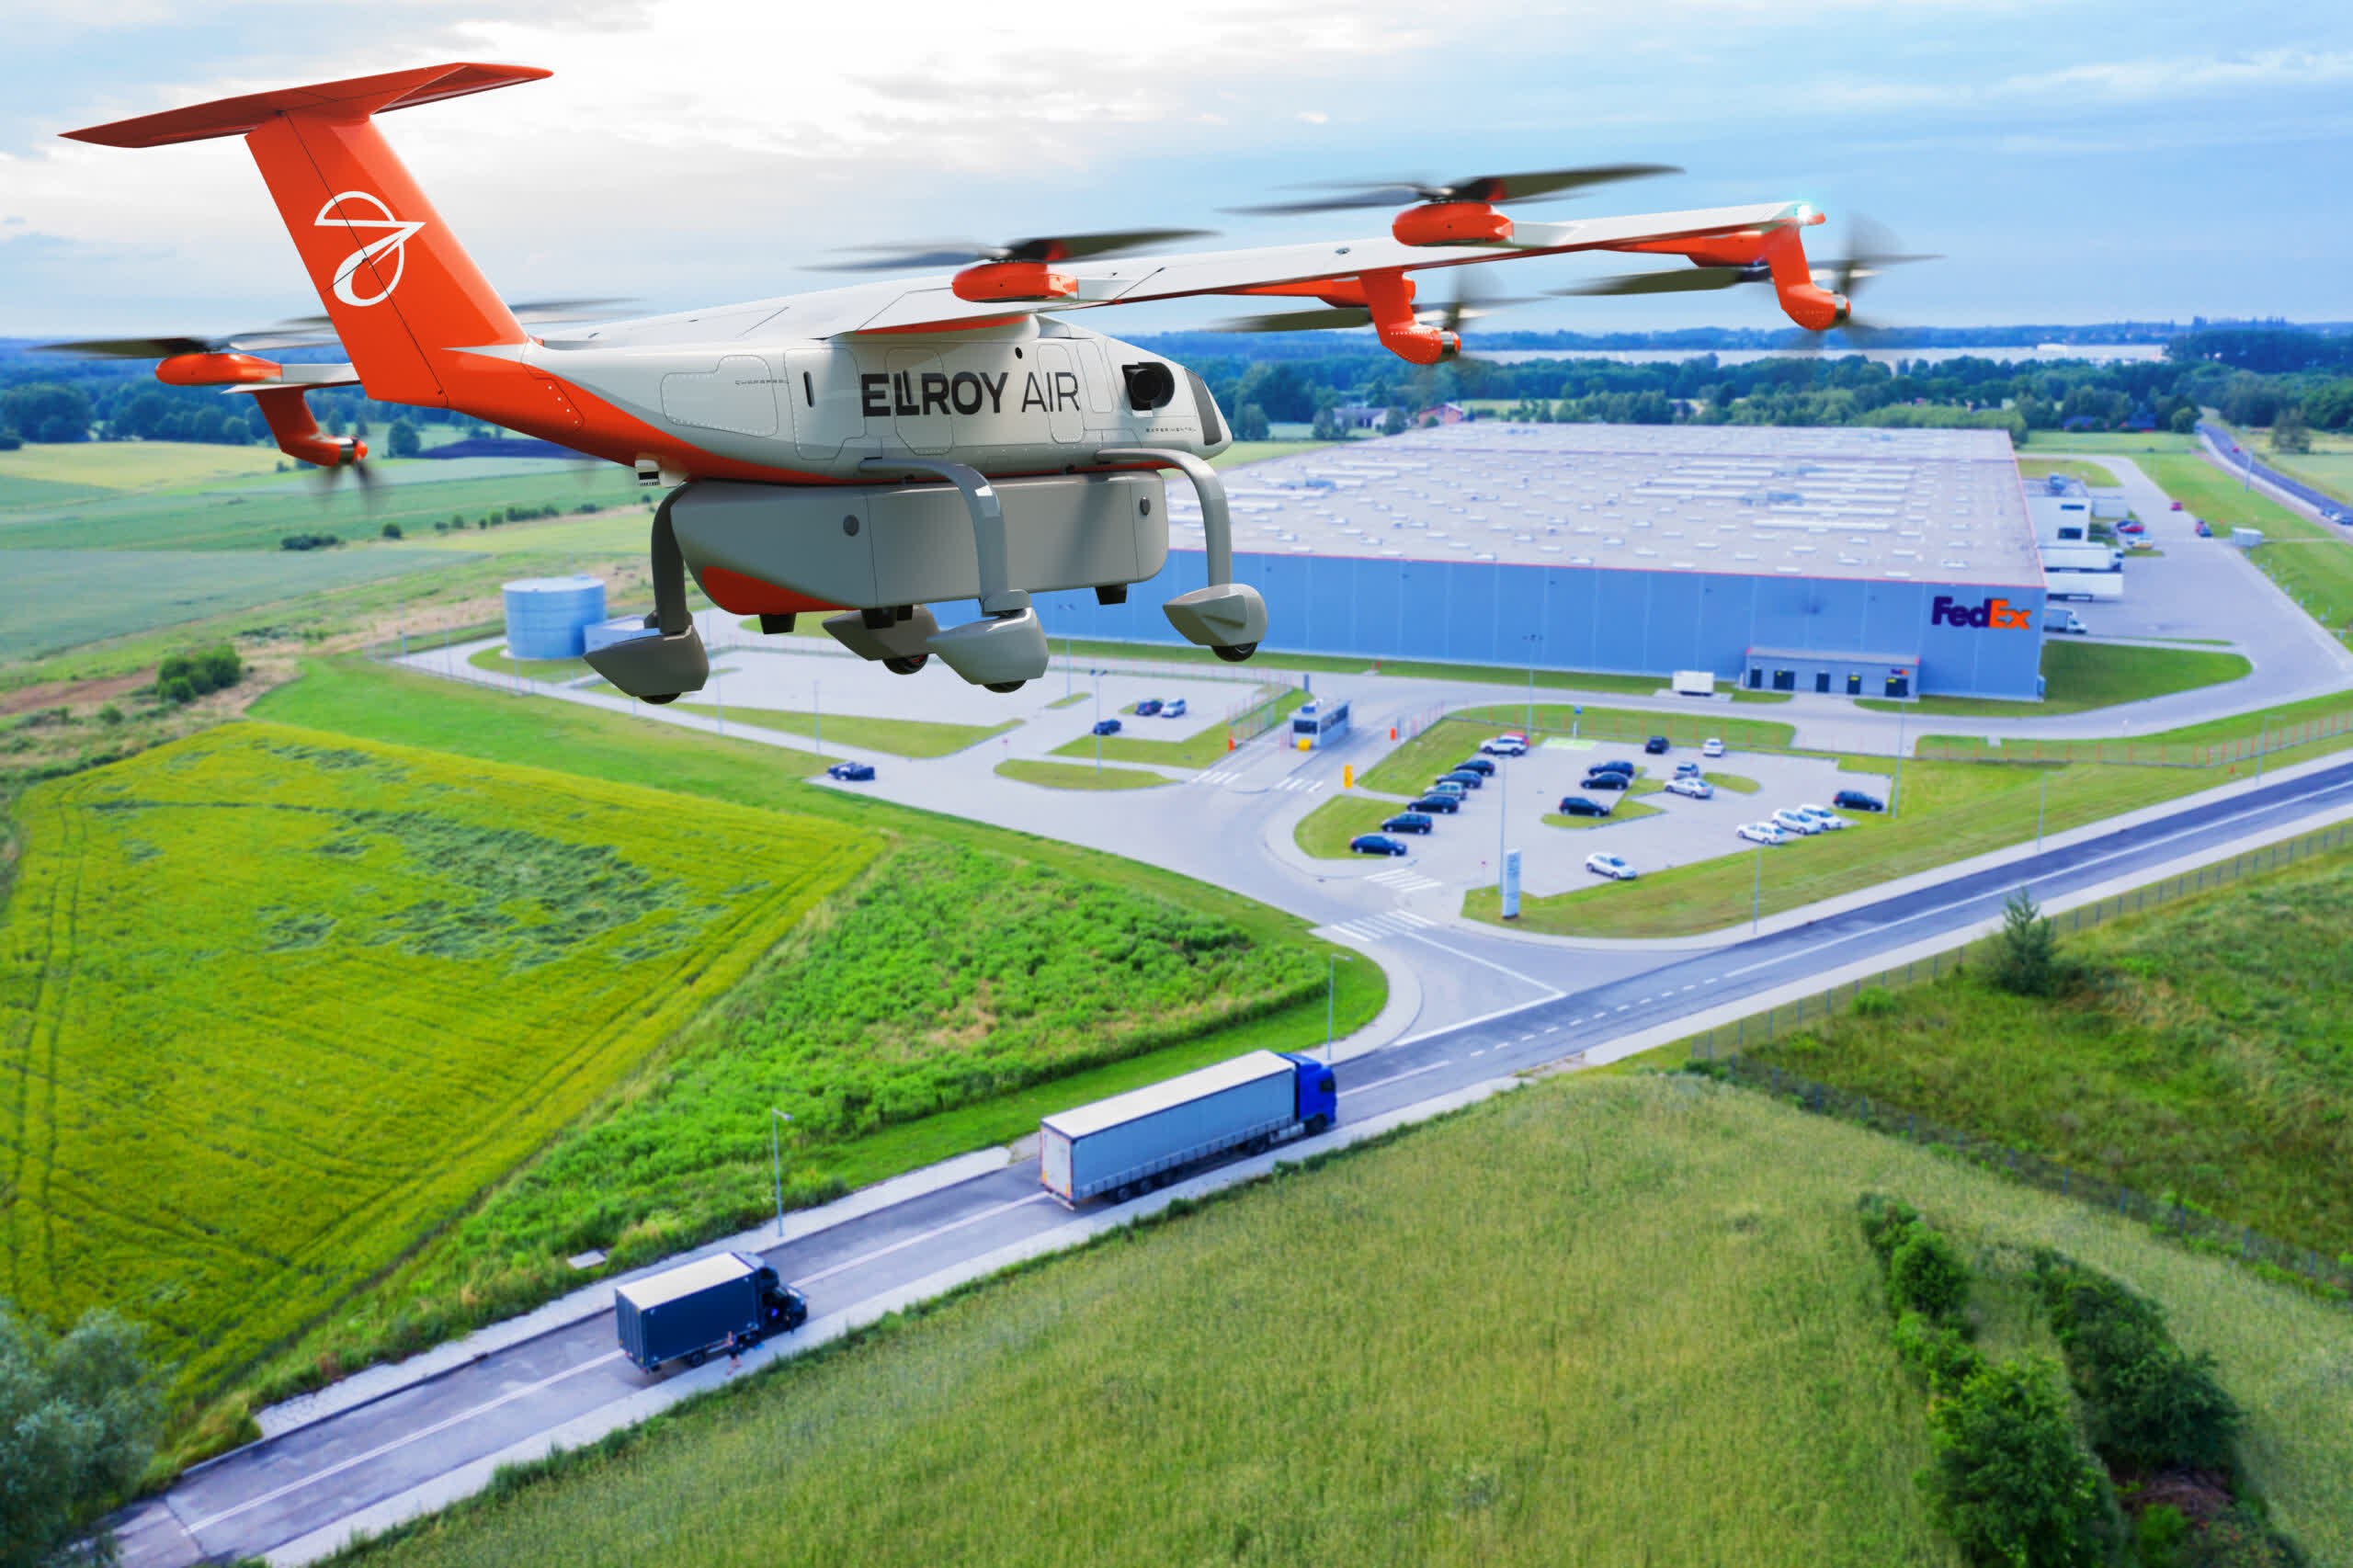 FedEx to test autonomous drone cargo delivery in 2023